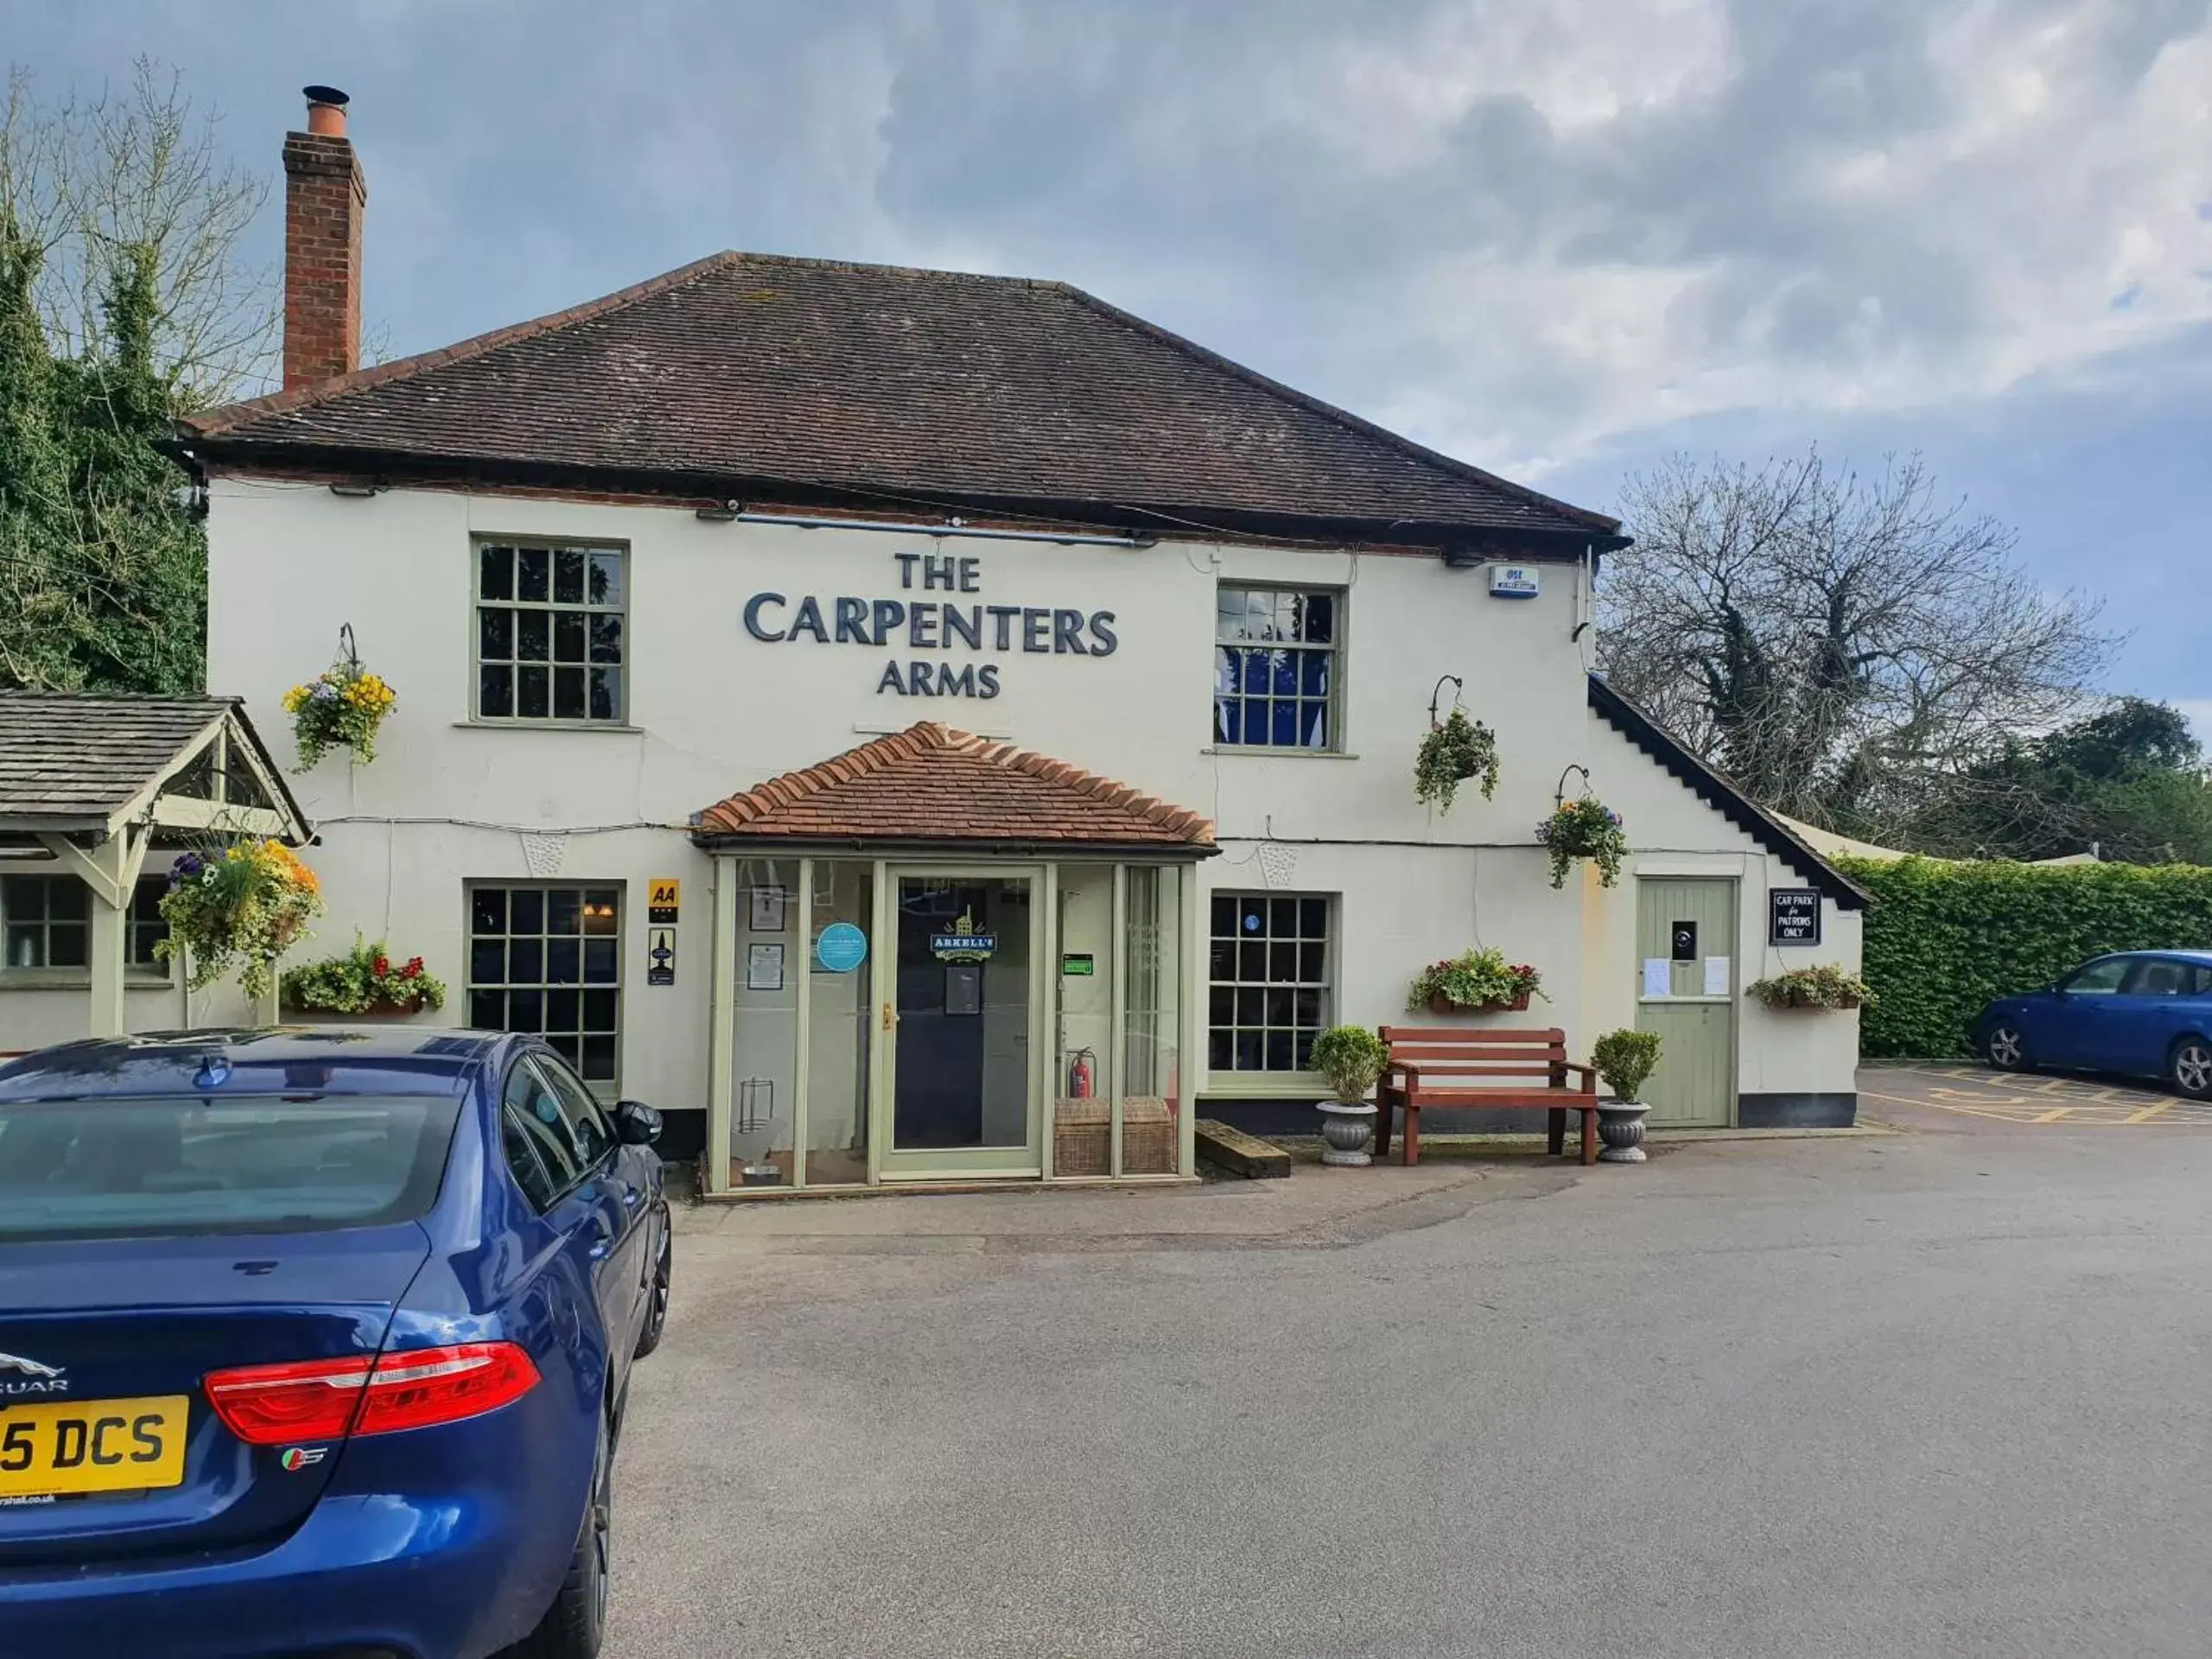 Property Building in The Carpenters Arms